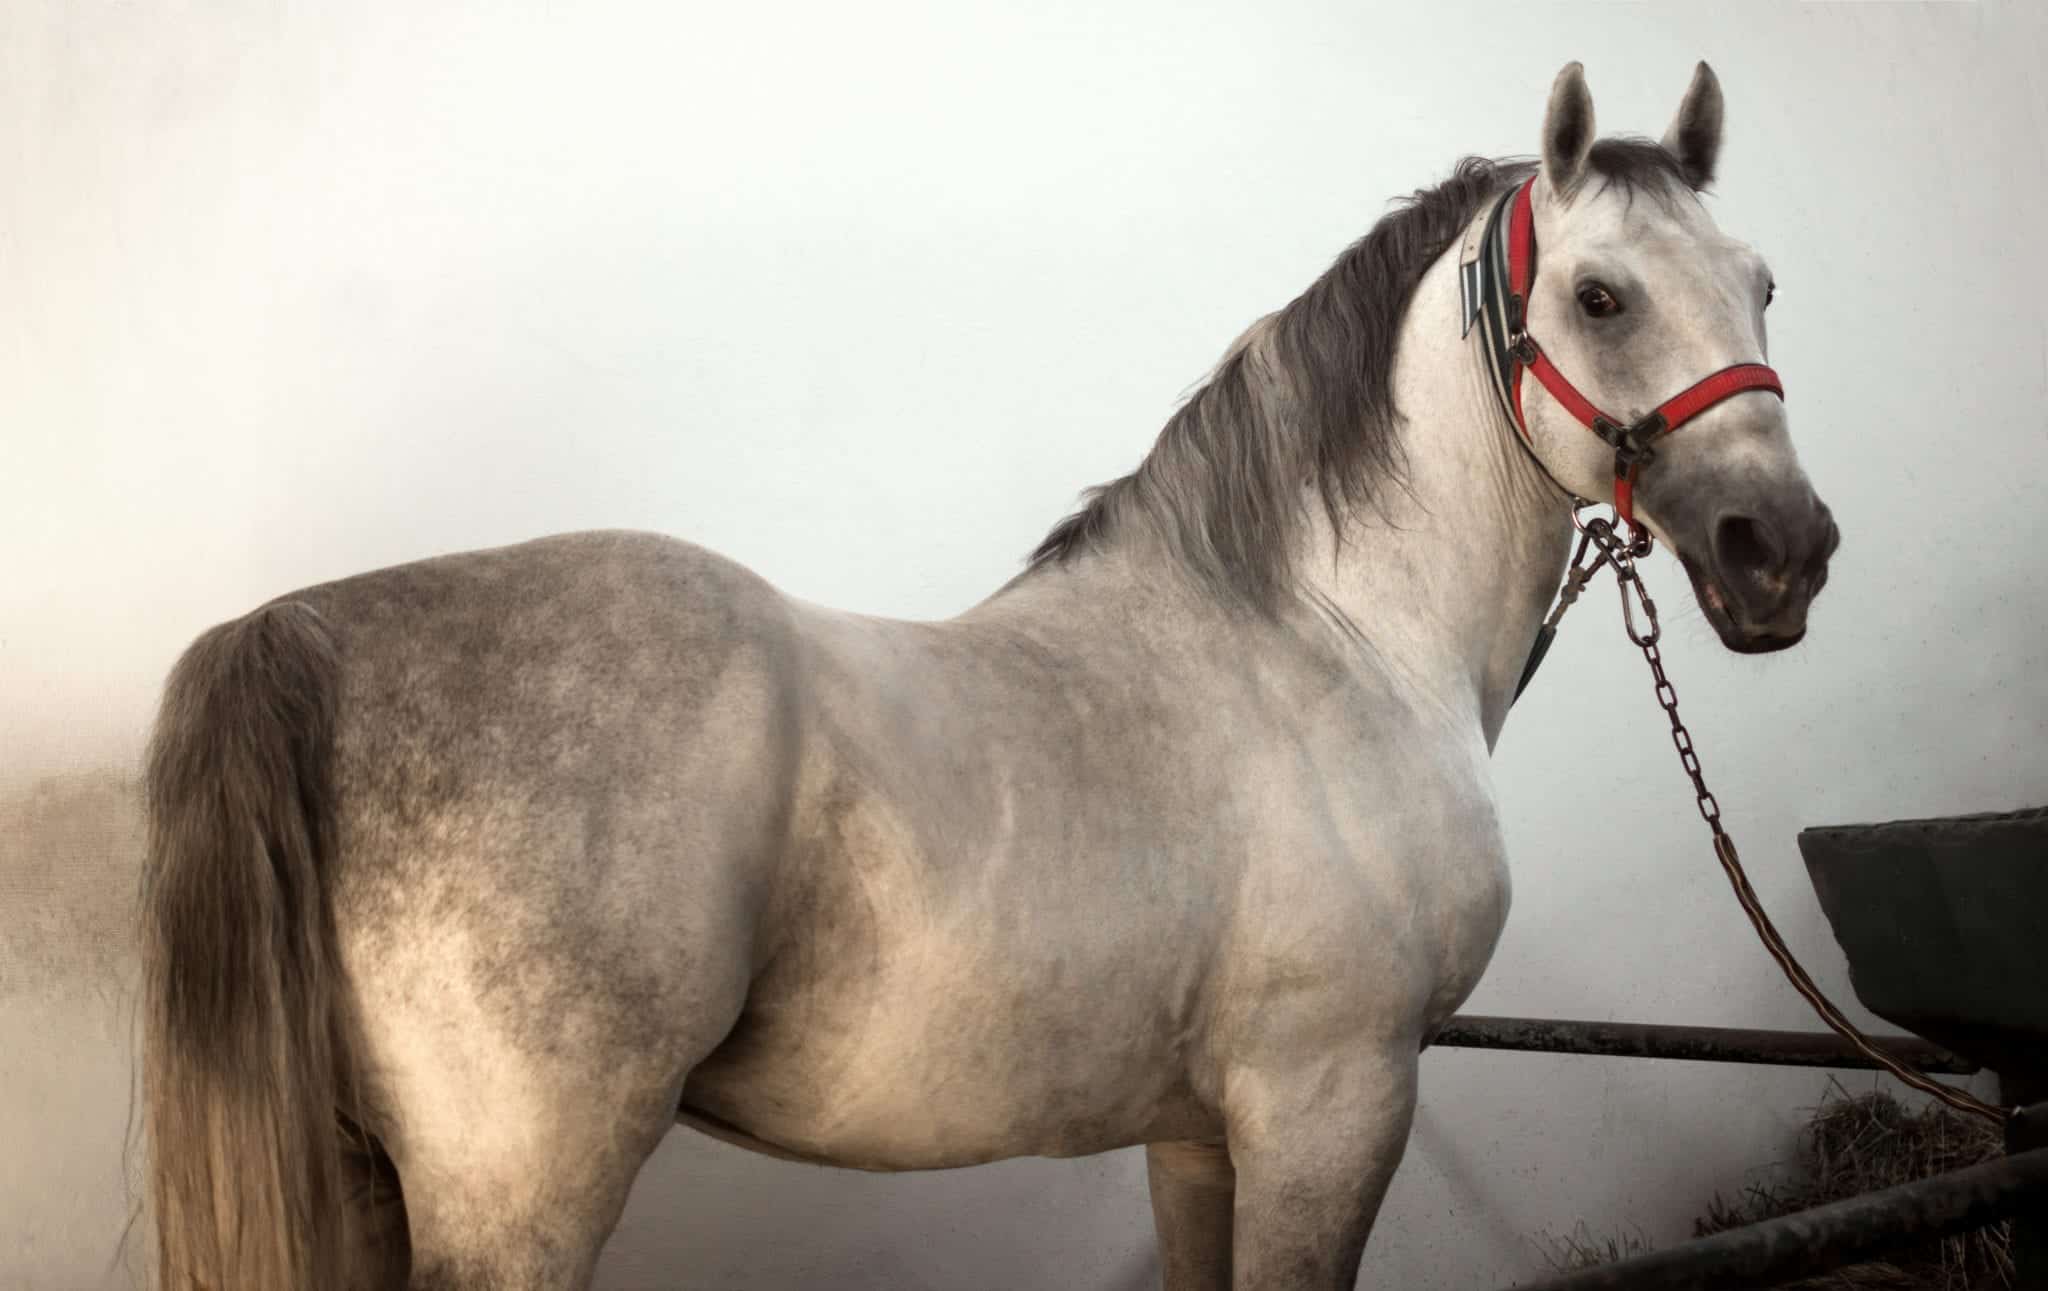 The white horse is standing in the sty indoors on white wall background.